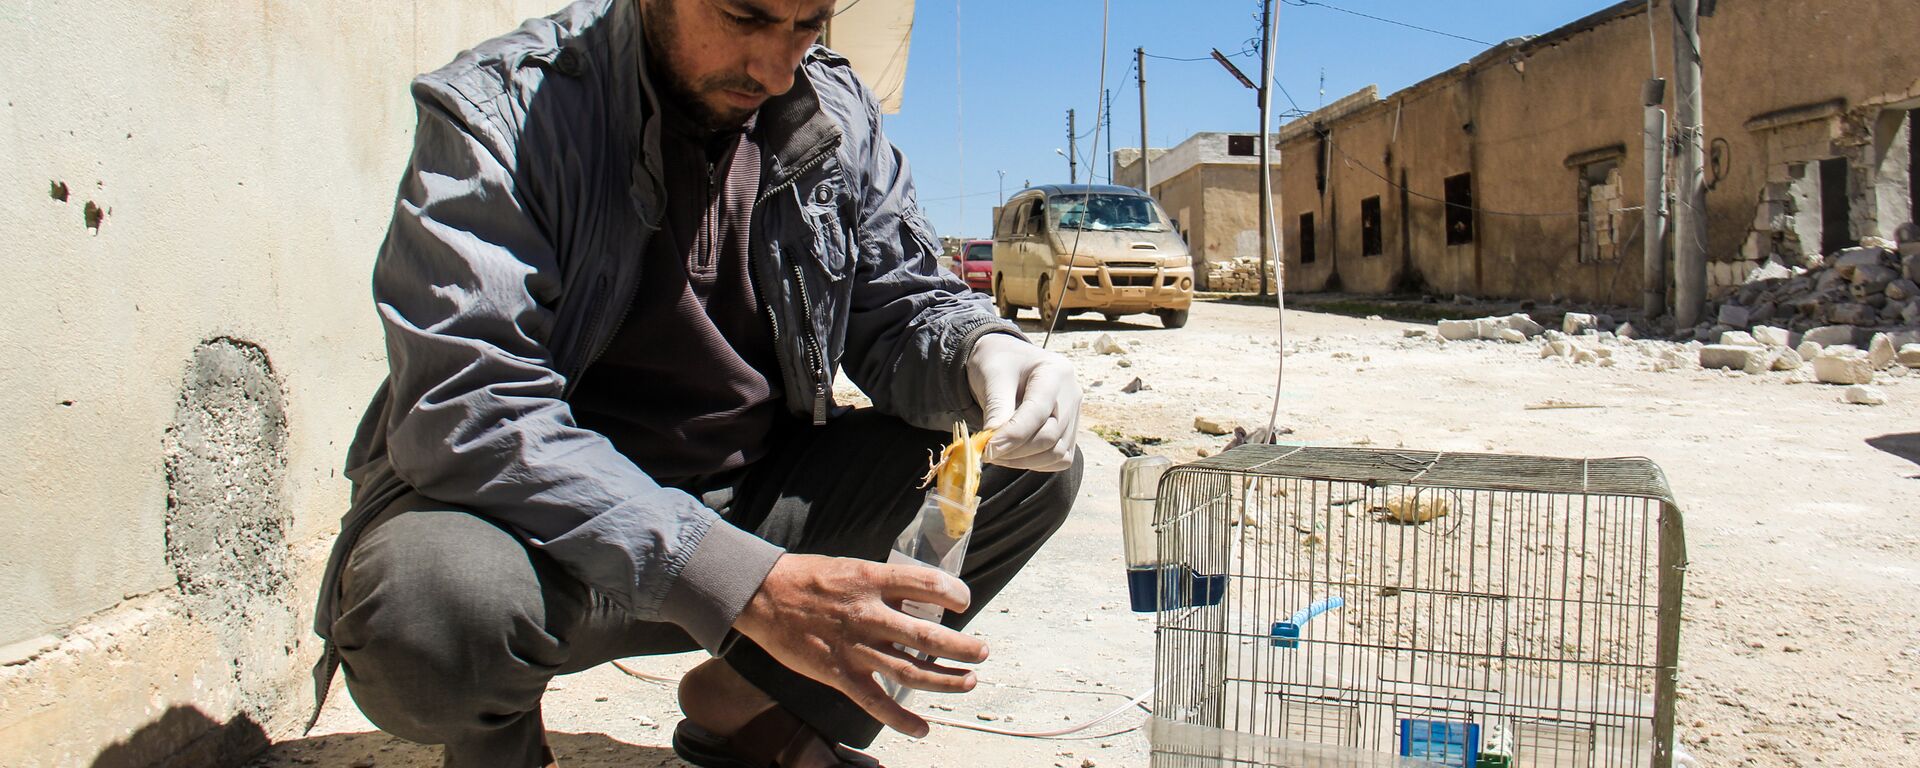 A Syrian man collects and bags the body of a dead bird, reportedly killed by a suspected toxic gas attack in Khan Sheikhun, in Syria’s northwestern Idlib province, on April 5, 2017 - Sputnik International, 1920, 13.10.2017